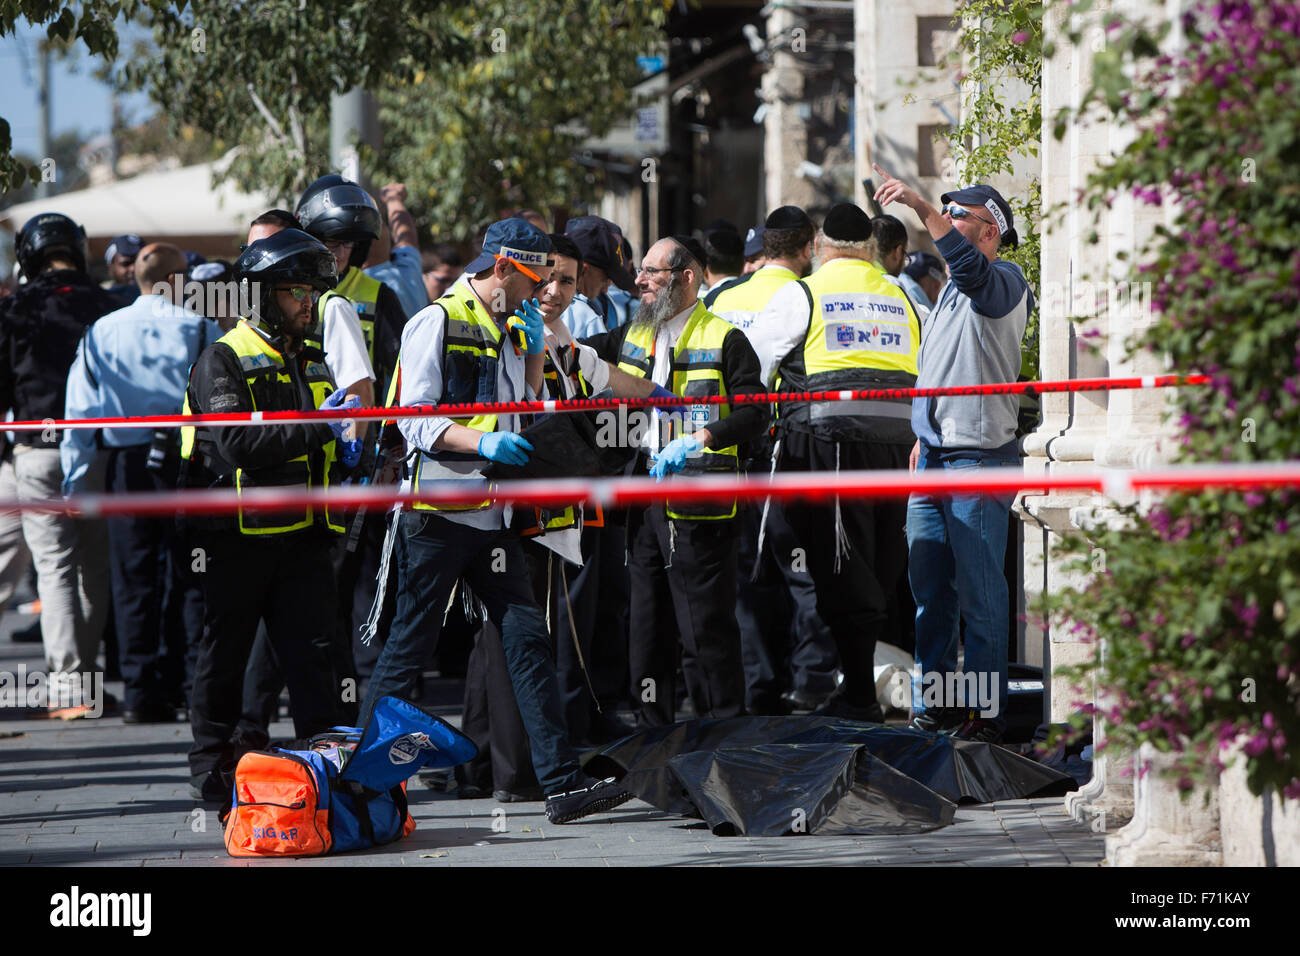 Jerusalem, Jerusalem. 23rd Nov, 2015. Israeli security forces and members of ZAKA team (a voluntary organisation responding to tragic incidents in Israel) work next to the covered body of a Palestinian girl at the scene of a stabbing attack outside the Mahne Yehuda, a busy outdoor market in central Jerusalem, on Nov. 23, 2015. Three Palestinian attackers were shot dead on Monday by Israeli security forces after they launched stabbing attacks in a new surge of tensions between the two sides. Credit:  JINI/Xinhua/Alamy Live News Stock Photo